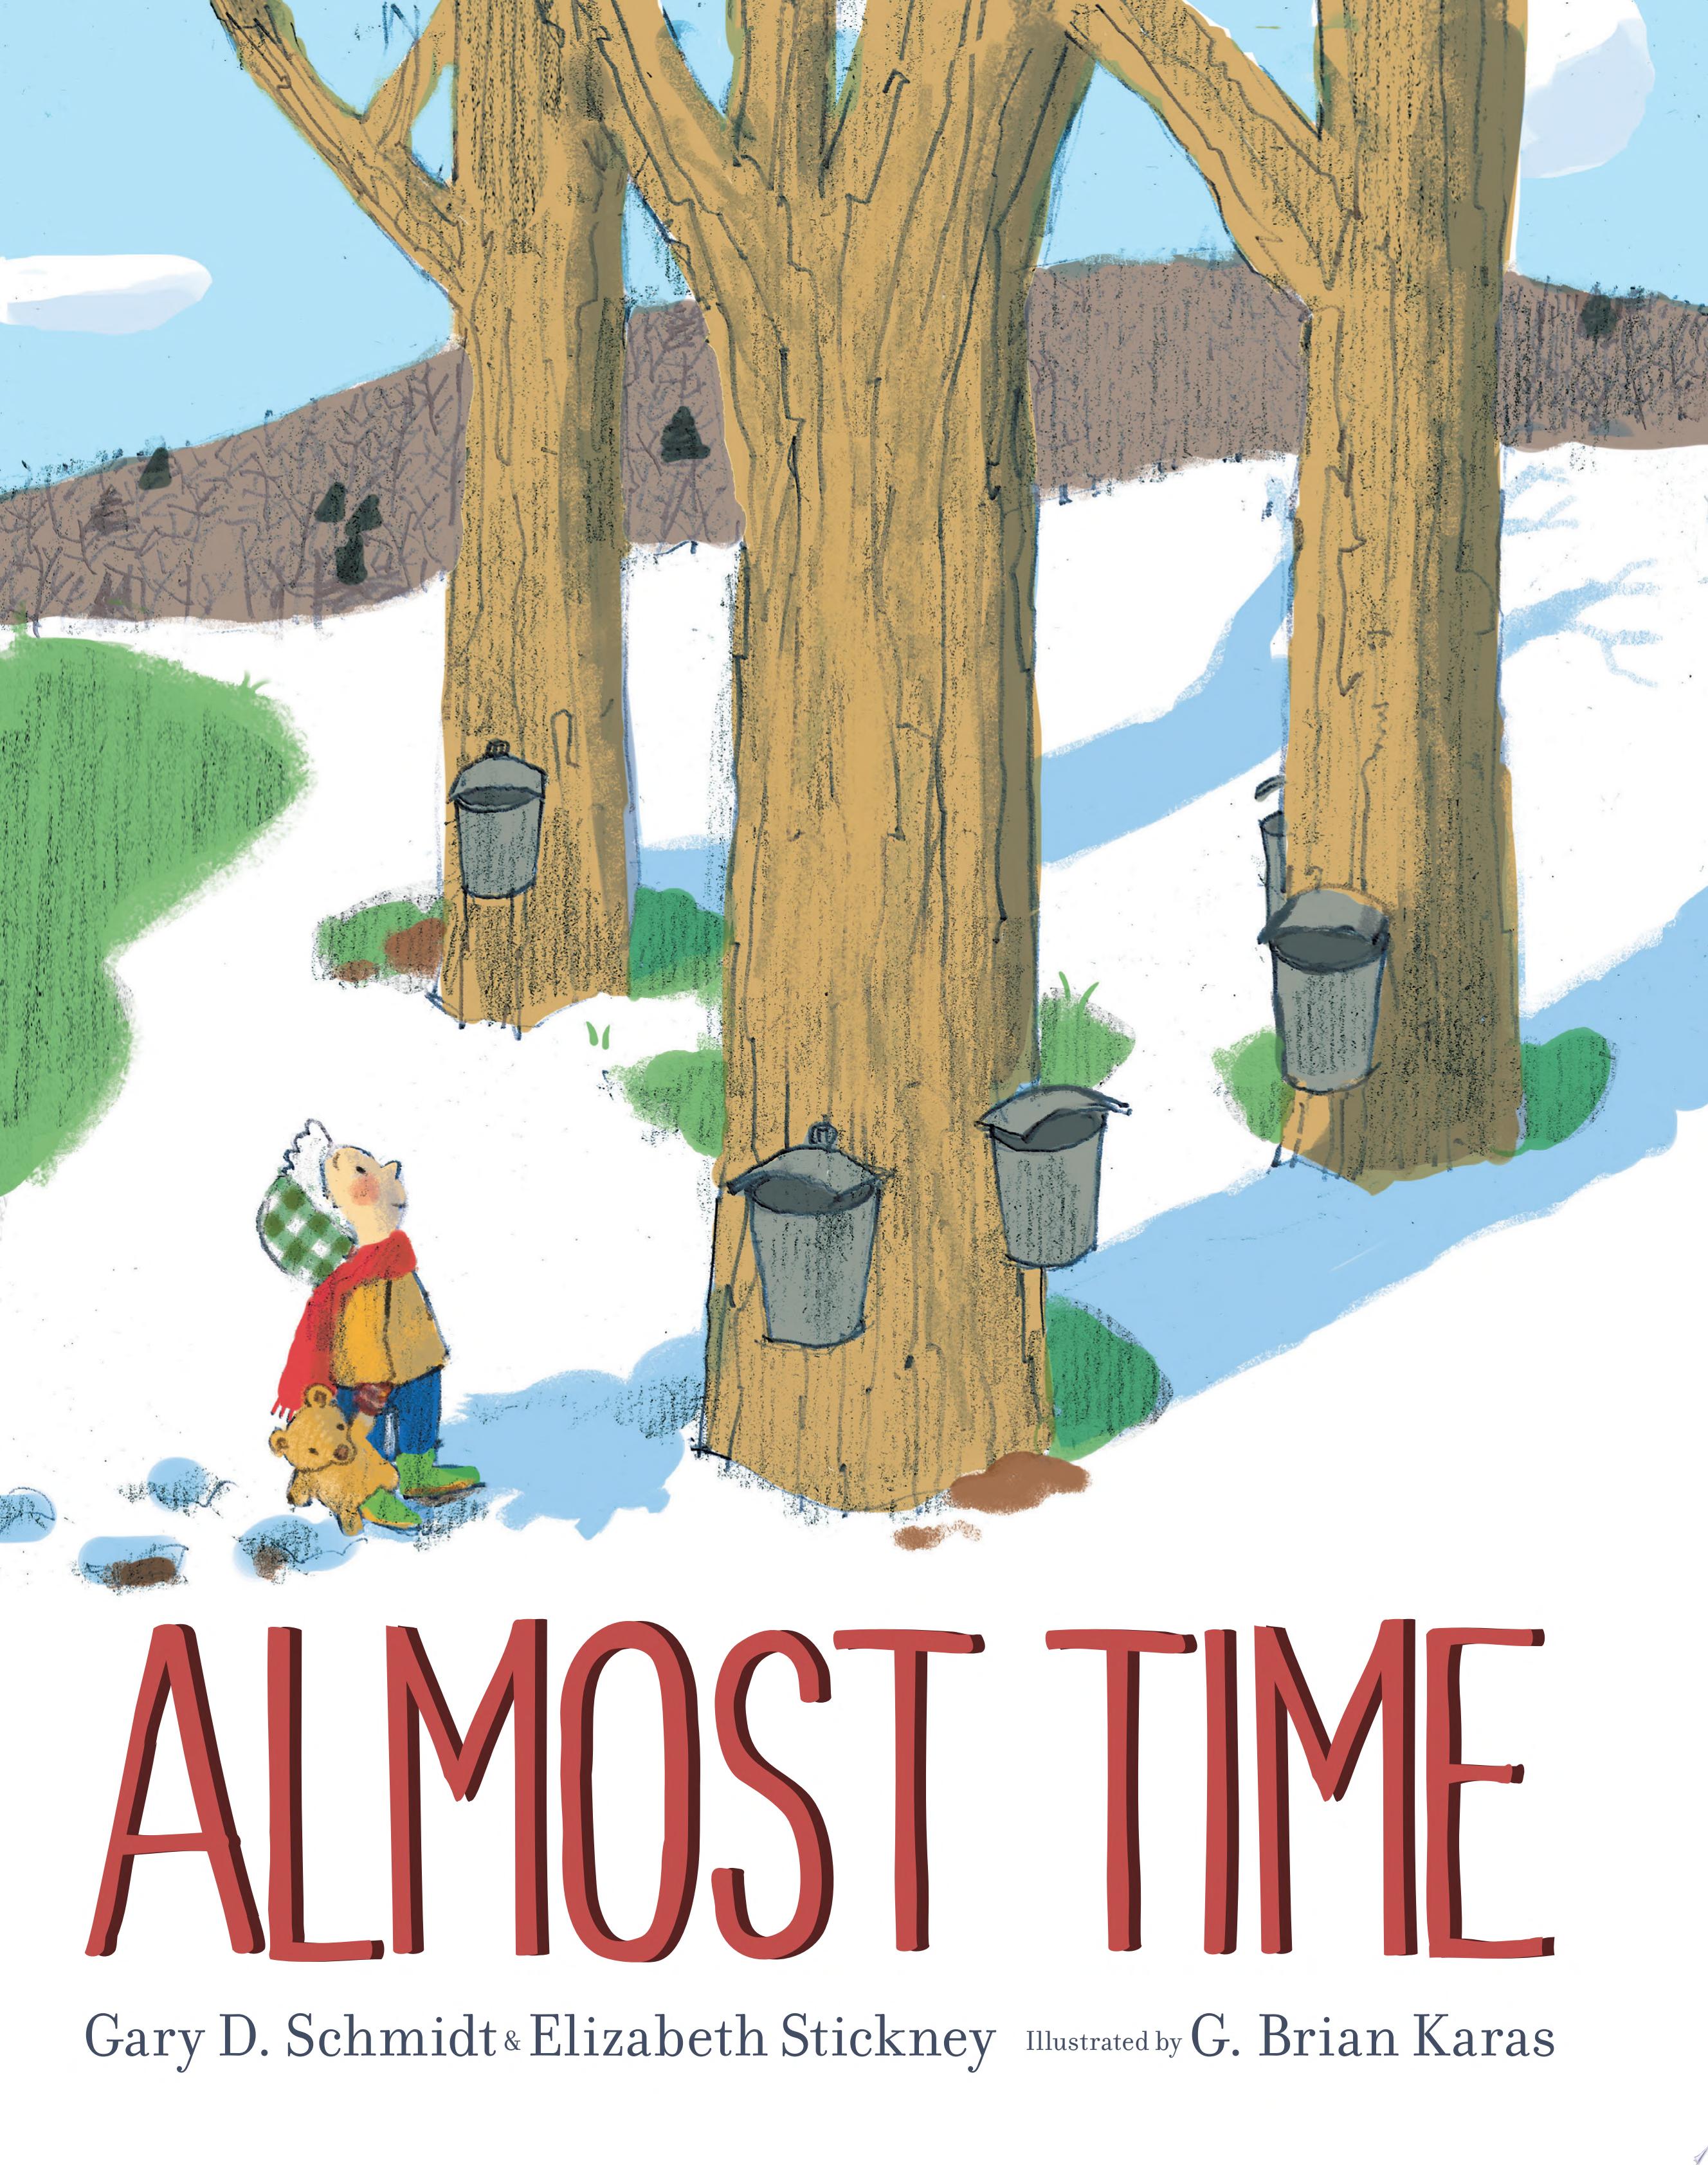 Image for "Almost Time"